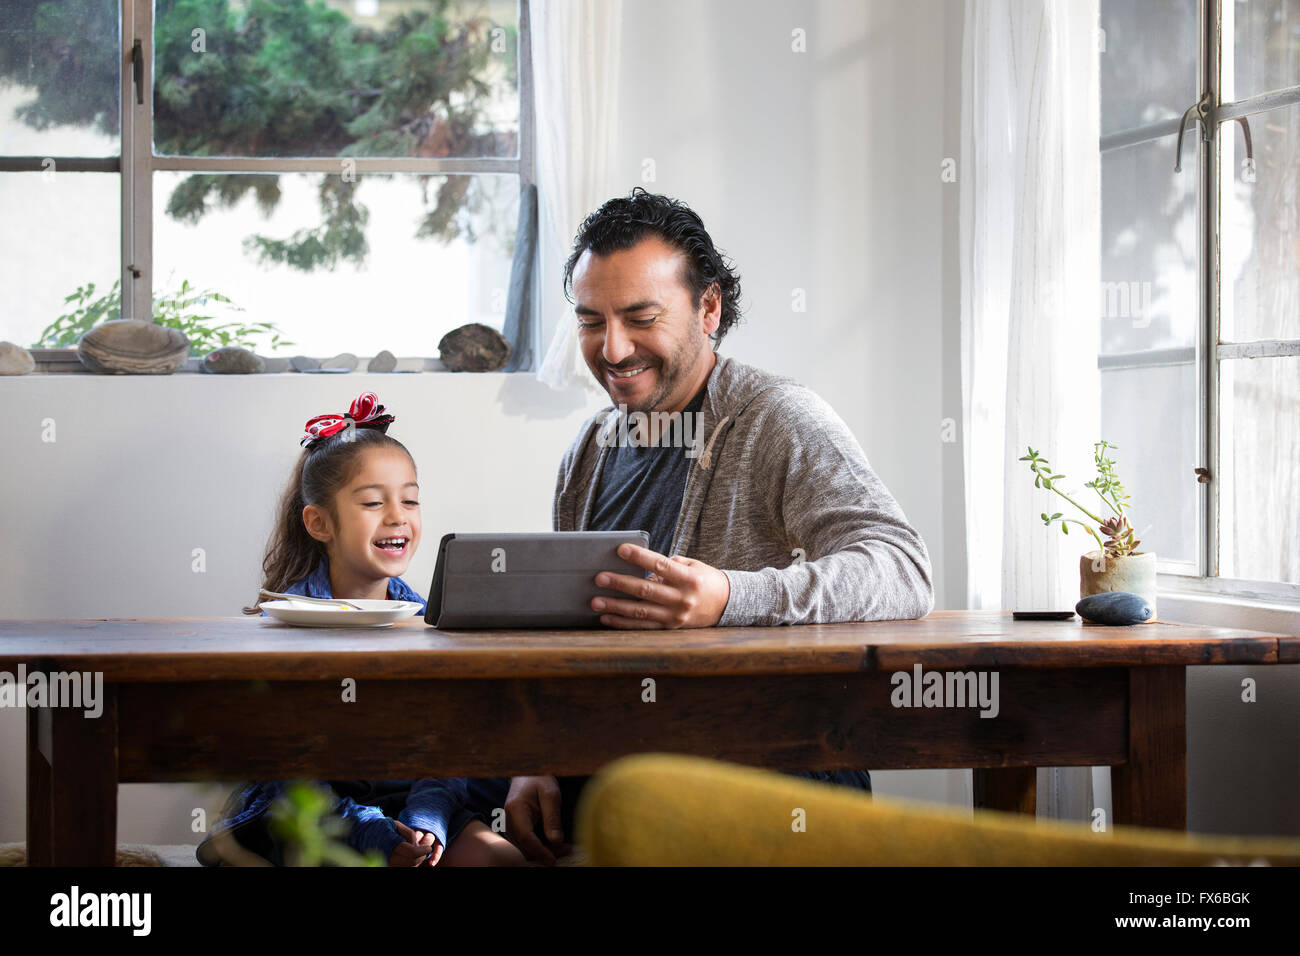 Hispanic father and daughter using digital tablet Stock Photo